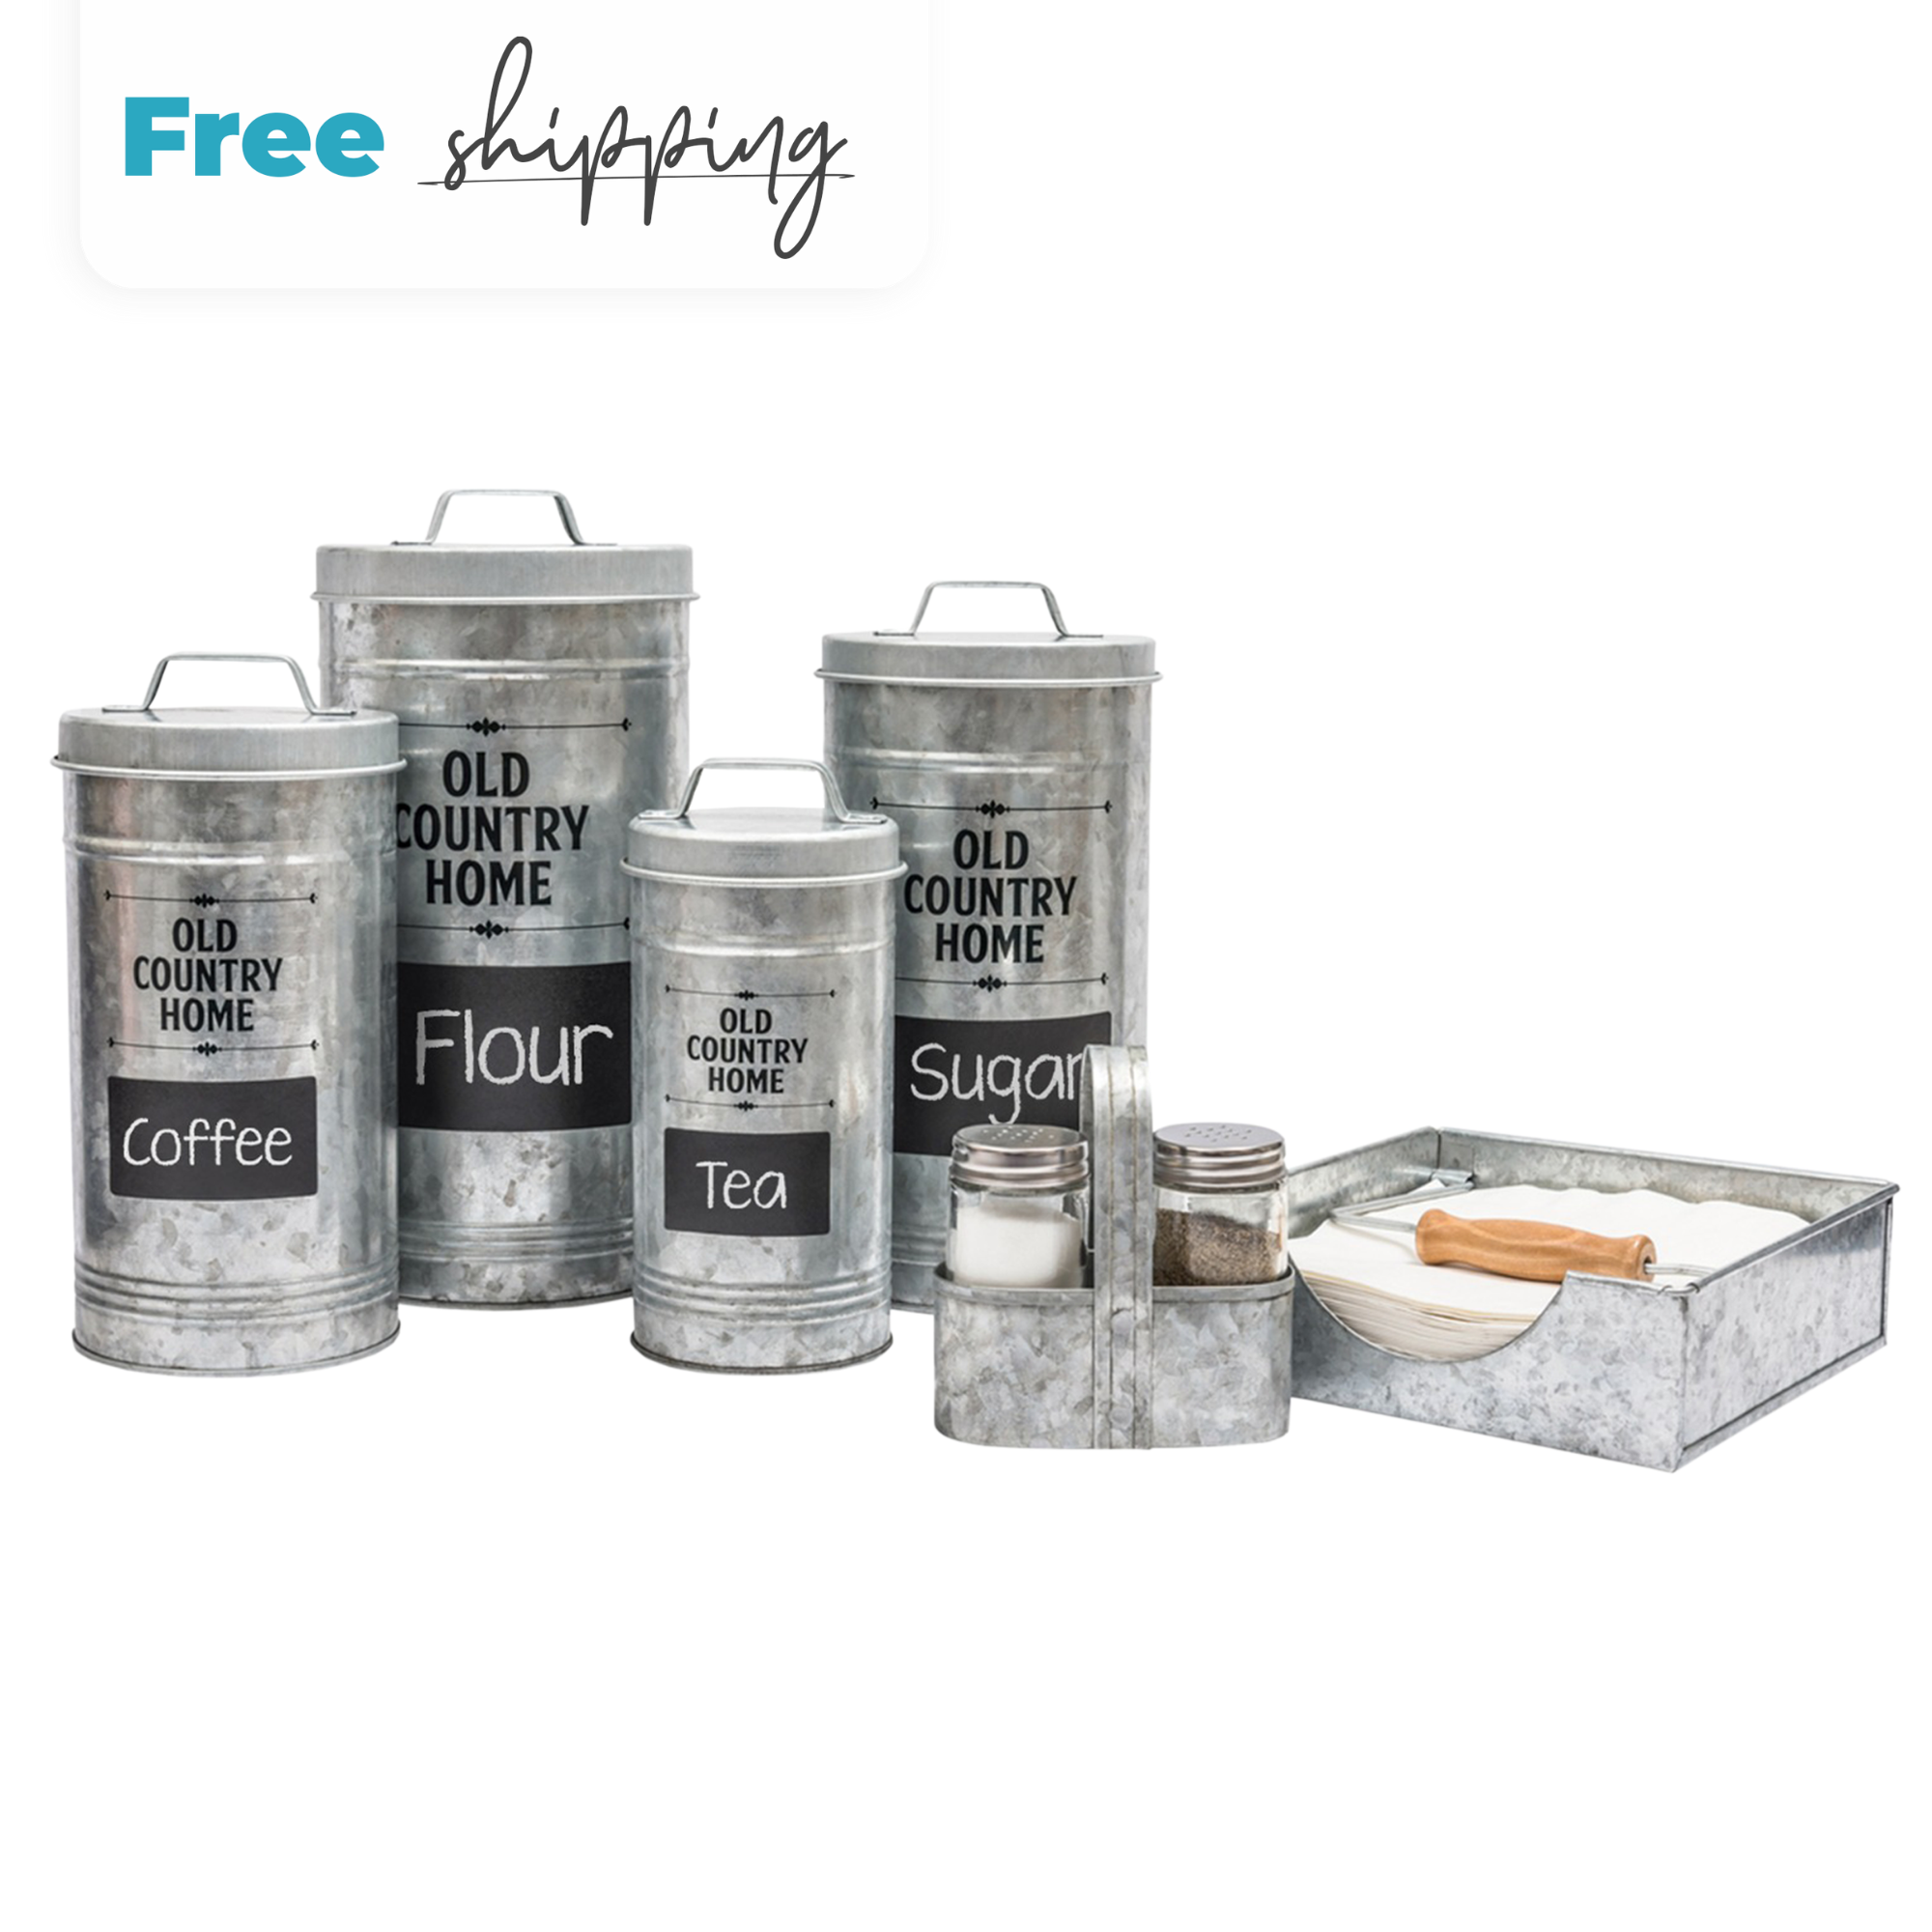 Farmhouse Kitchen Decor Trio Set by Saratoga Home - Salt & Pepper Shakers With Caddy Set, Napkin Holder and Set of 4 Canisters with Labels & Marker